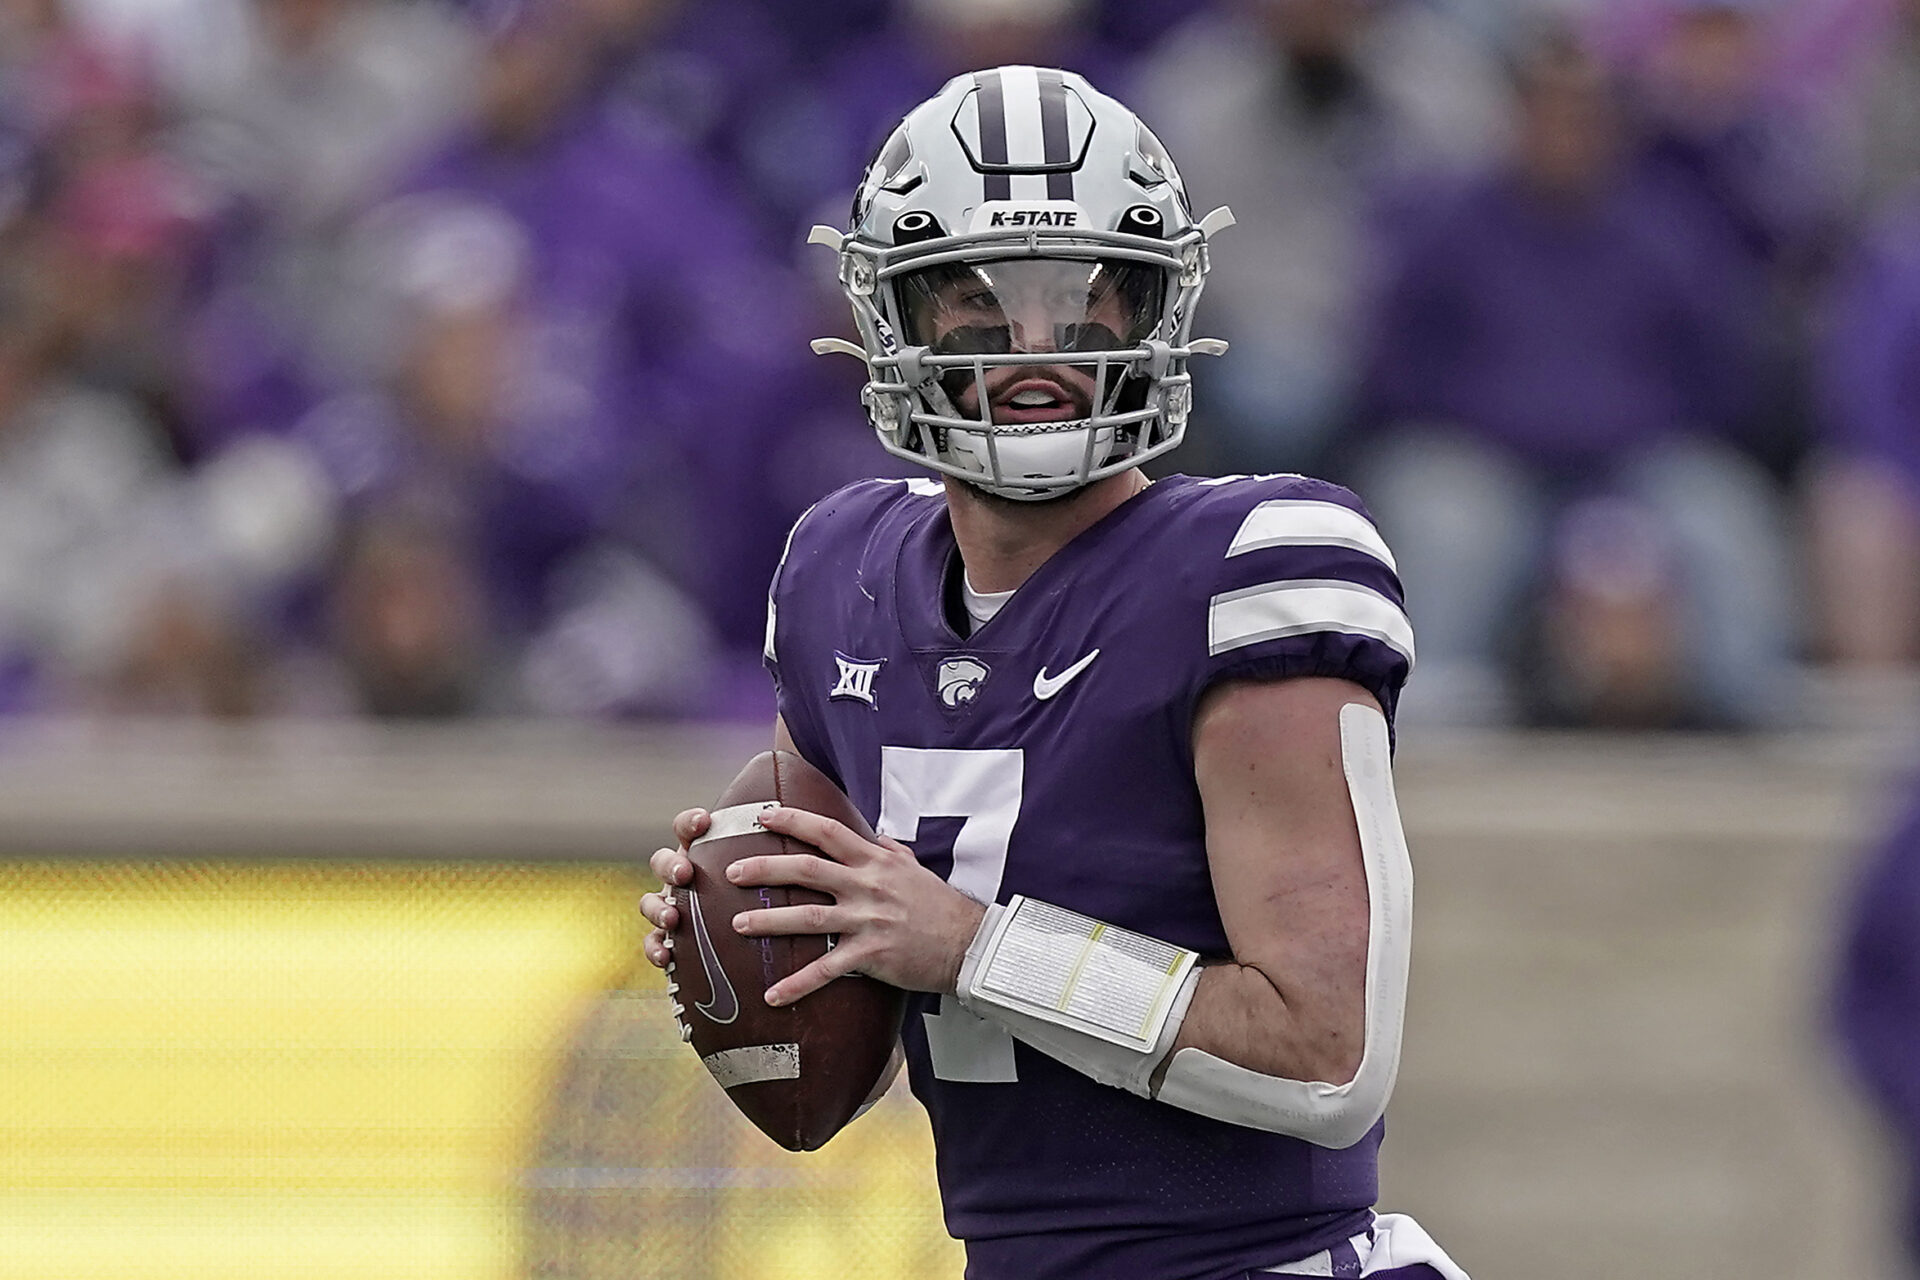 Kansas State quarterback Skylar Thompson looks for a receiver during the second half of an NCAA college football game against West Virginia, Saturday, Nov. 13, 2021, in Manhattan, Kan. (AP Photo/Charlie Riedel)